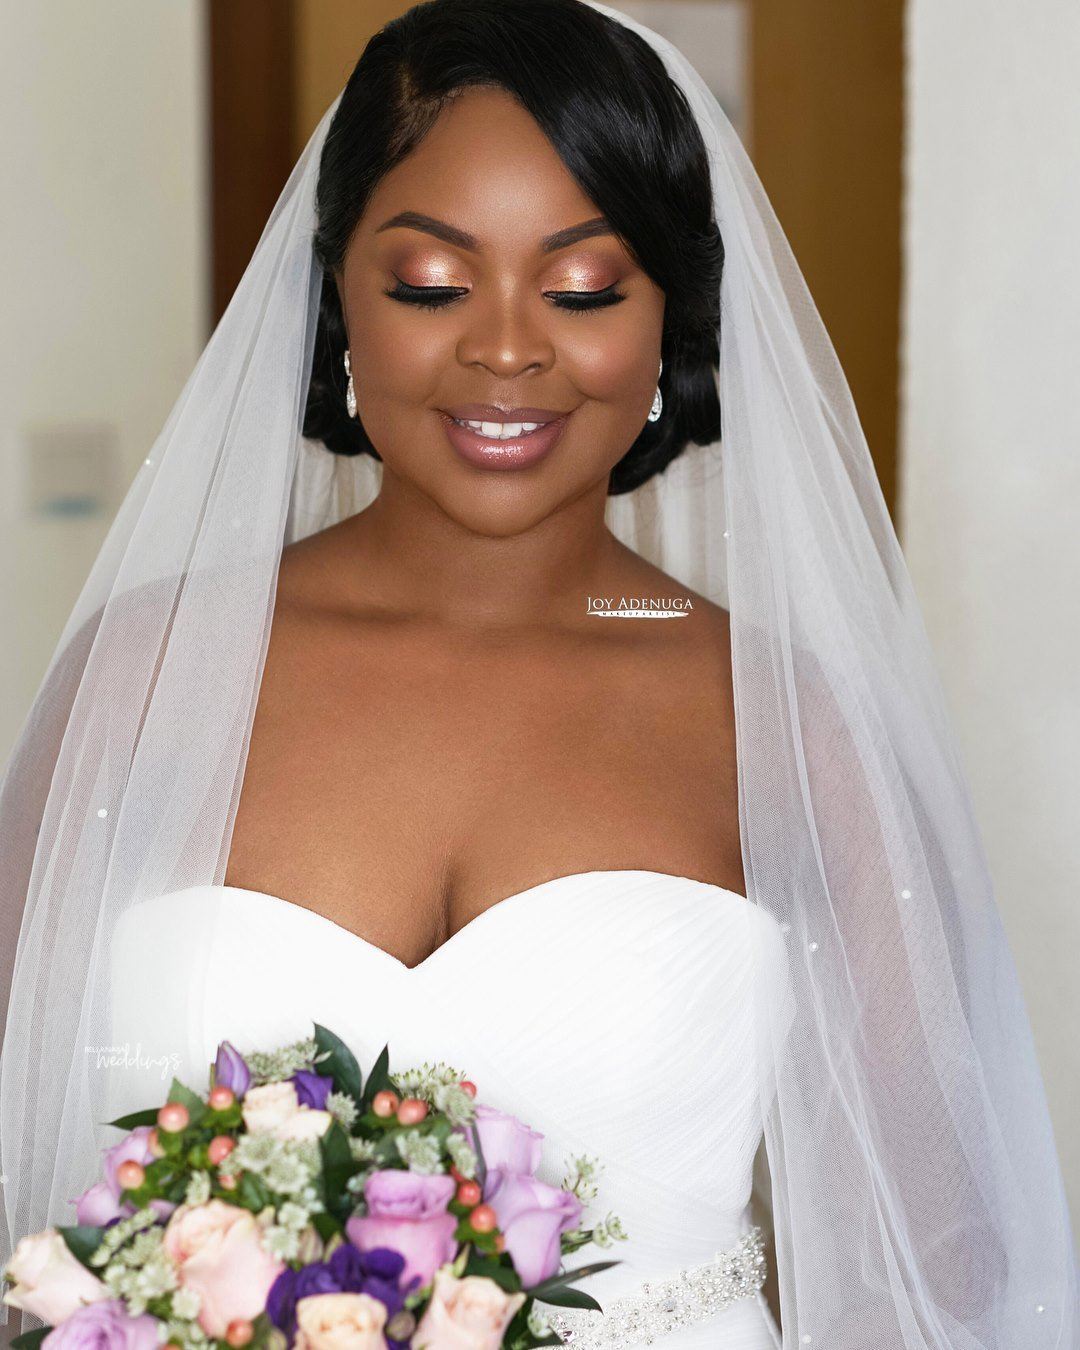 Bride's Boobs Pop Out On Her Wedding Day (Photo) - Events - Nigeria